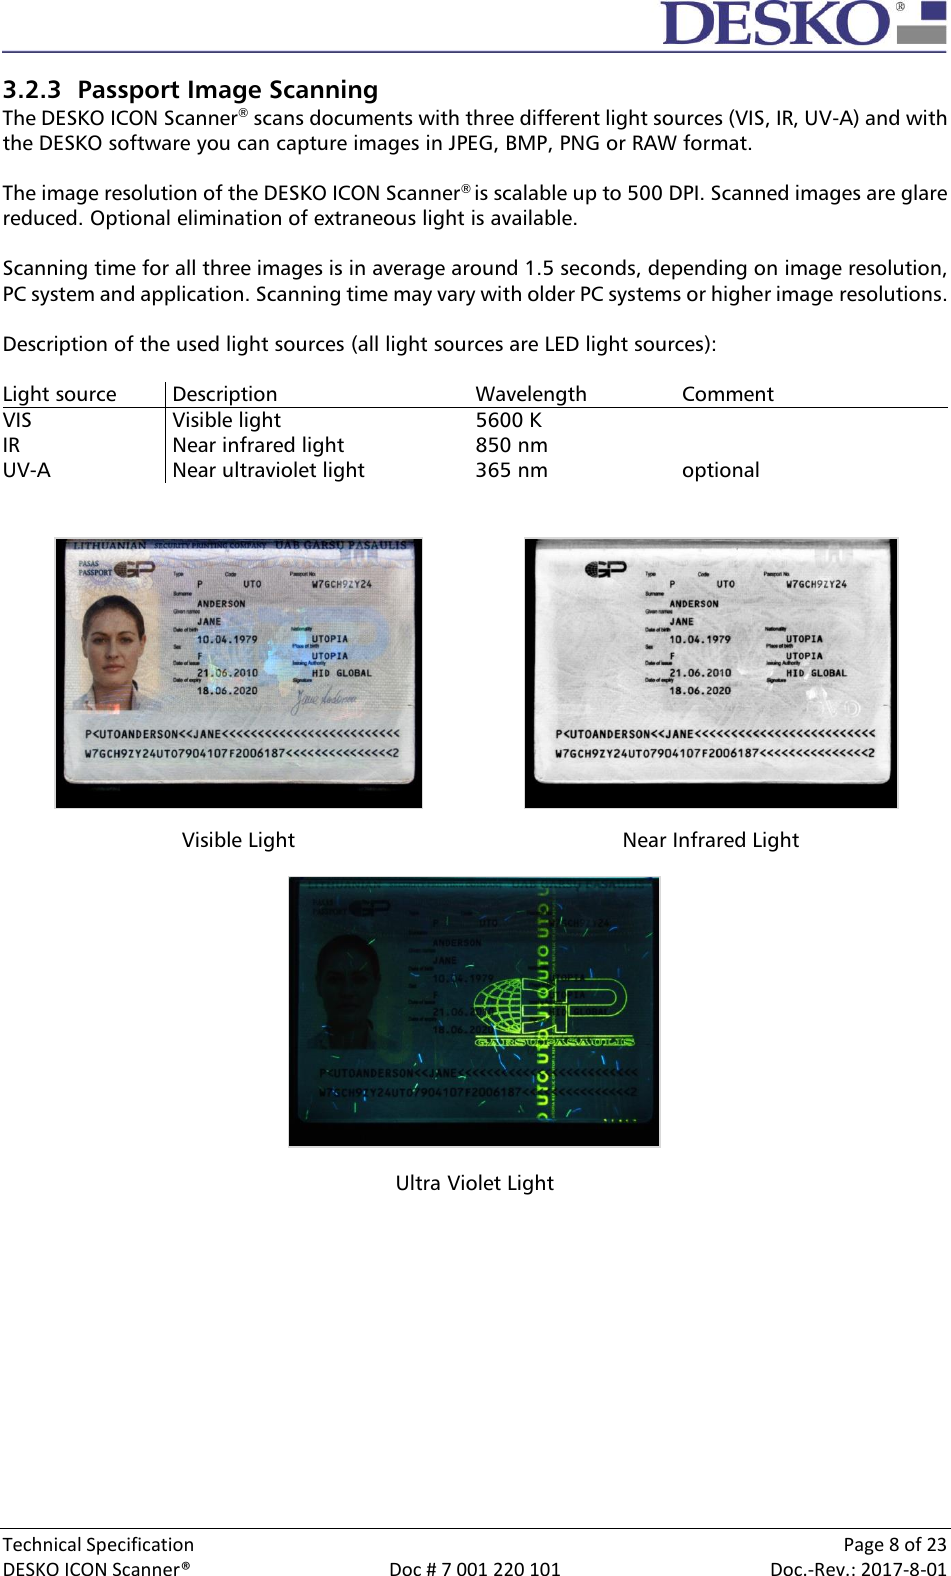  Technical Specification    Page 8 of 23 DESKO ICON Scanner®  Doc # 7 001 220 101  Doc.-Rev.: 2017-8-01  3.2.3 Passport Image Scanning The DESKO ICON Scanner® scans documents with three different light sources (VIS, IR, UV-A) and with the DESKO software you can capture images in JPEG, BMP, PNG or RAW format.  The image resolution of the DESKO ICON Scanner® is scalable up to 500 DPI. Scanned images are glare reduced. Optional elimination of extraneous light is available.  Scanning time for all three images is in average around 1.5 seconds, depending on image resolution, PC system and application. Scanning time may vary with older PC systems or higher image resolutions.  Description of the used light sources (all light sources are LED light sources):  Light source  Description Wavelength Comment VIS  Visible light 5600 K  IR  Near infrared light 850 nm  UV-A  Near ultraviolet light 365 nm optional     Visible Light Near Infrared Light  Ultra Violet Light    